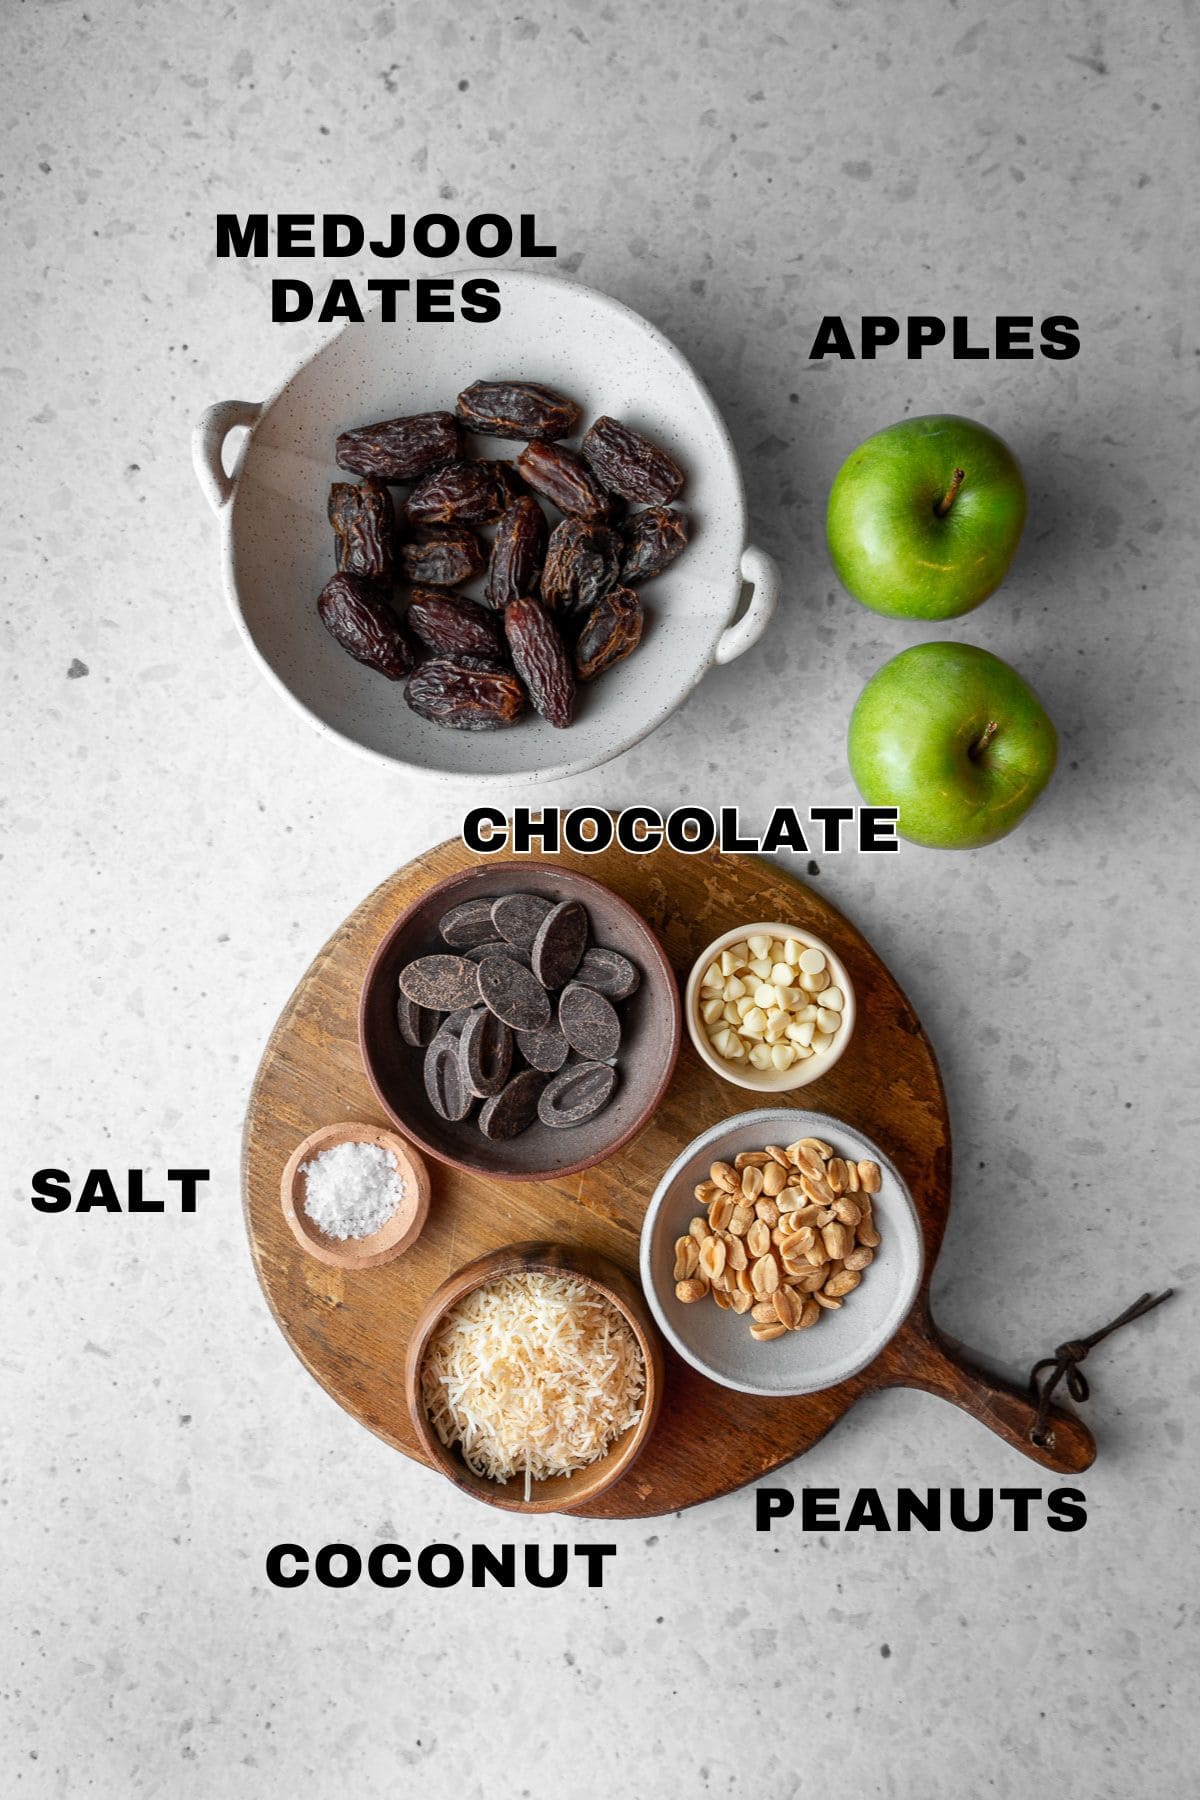 Medjool dates, apples, chocolates, salt, peanuts, and coconut ingredients with labels.